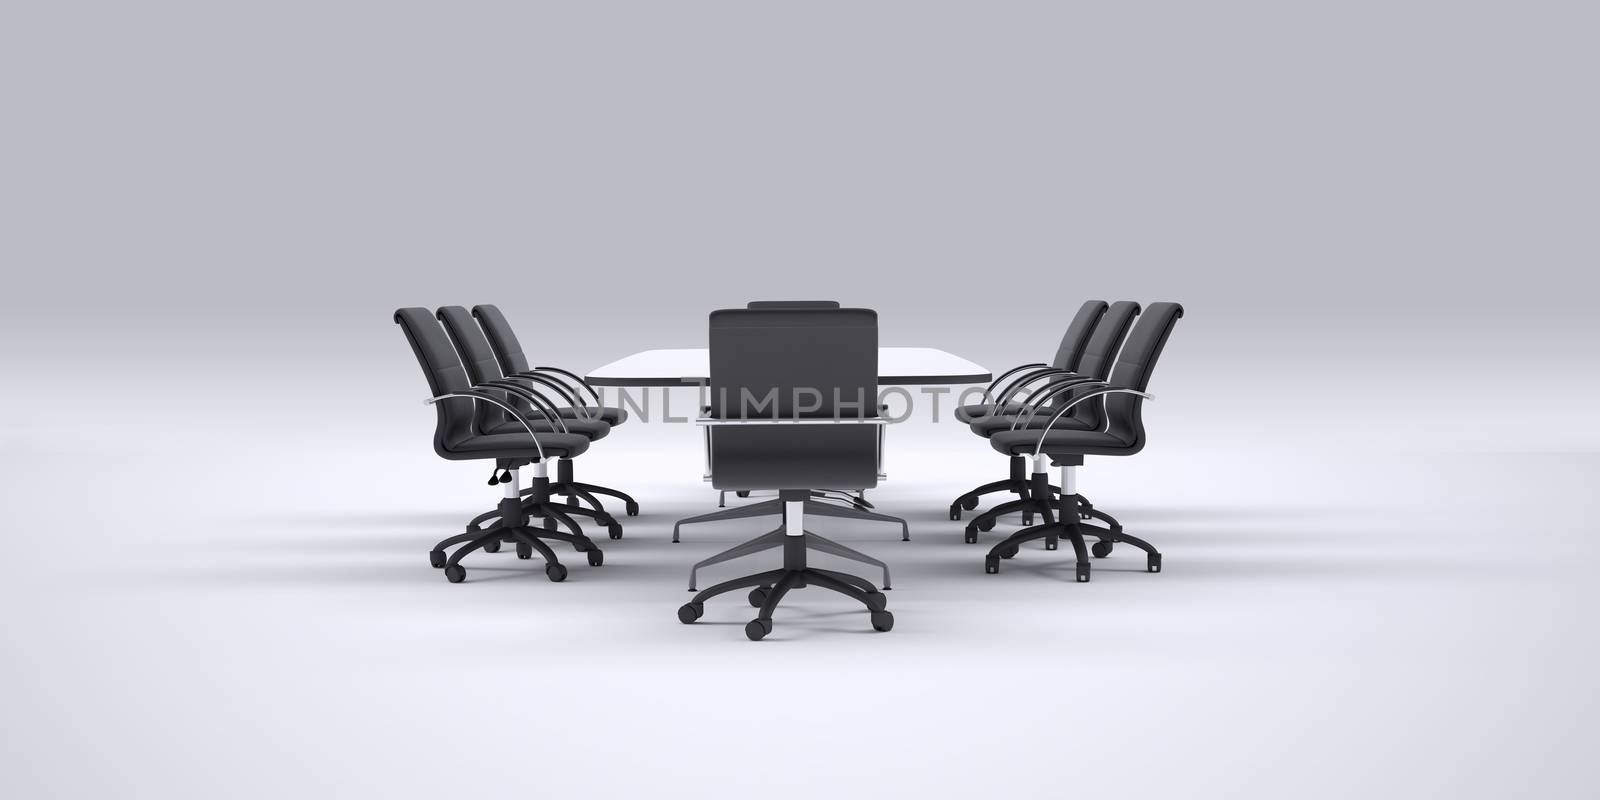 Conference table and office chairs. Gray gradient background